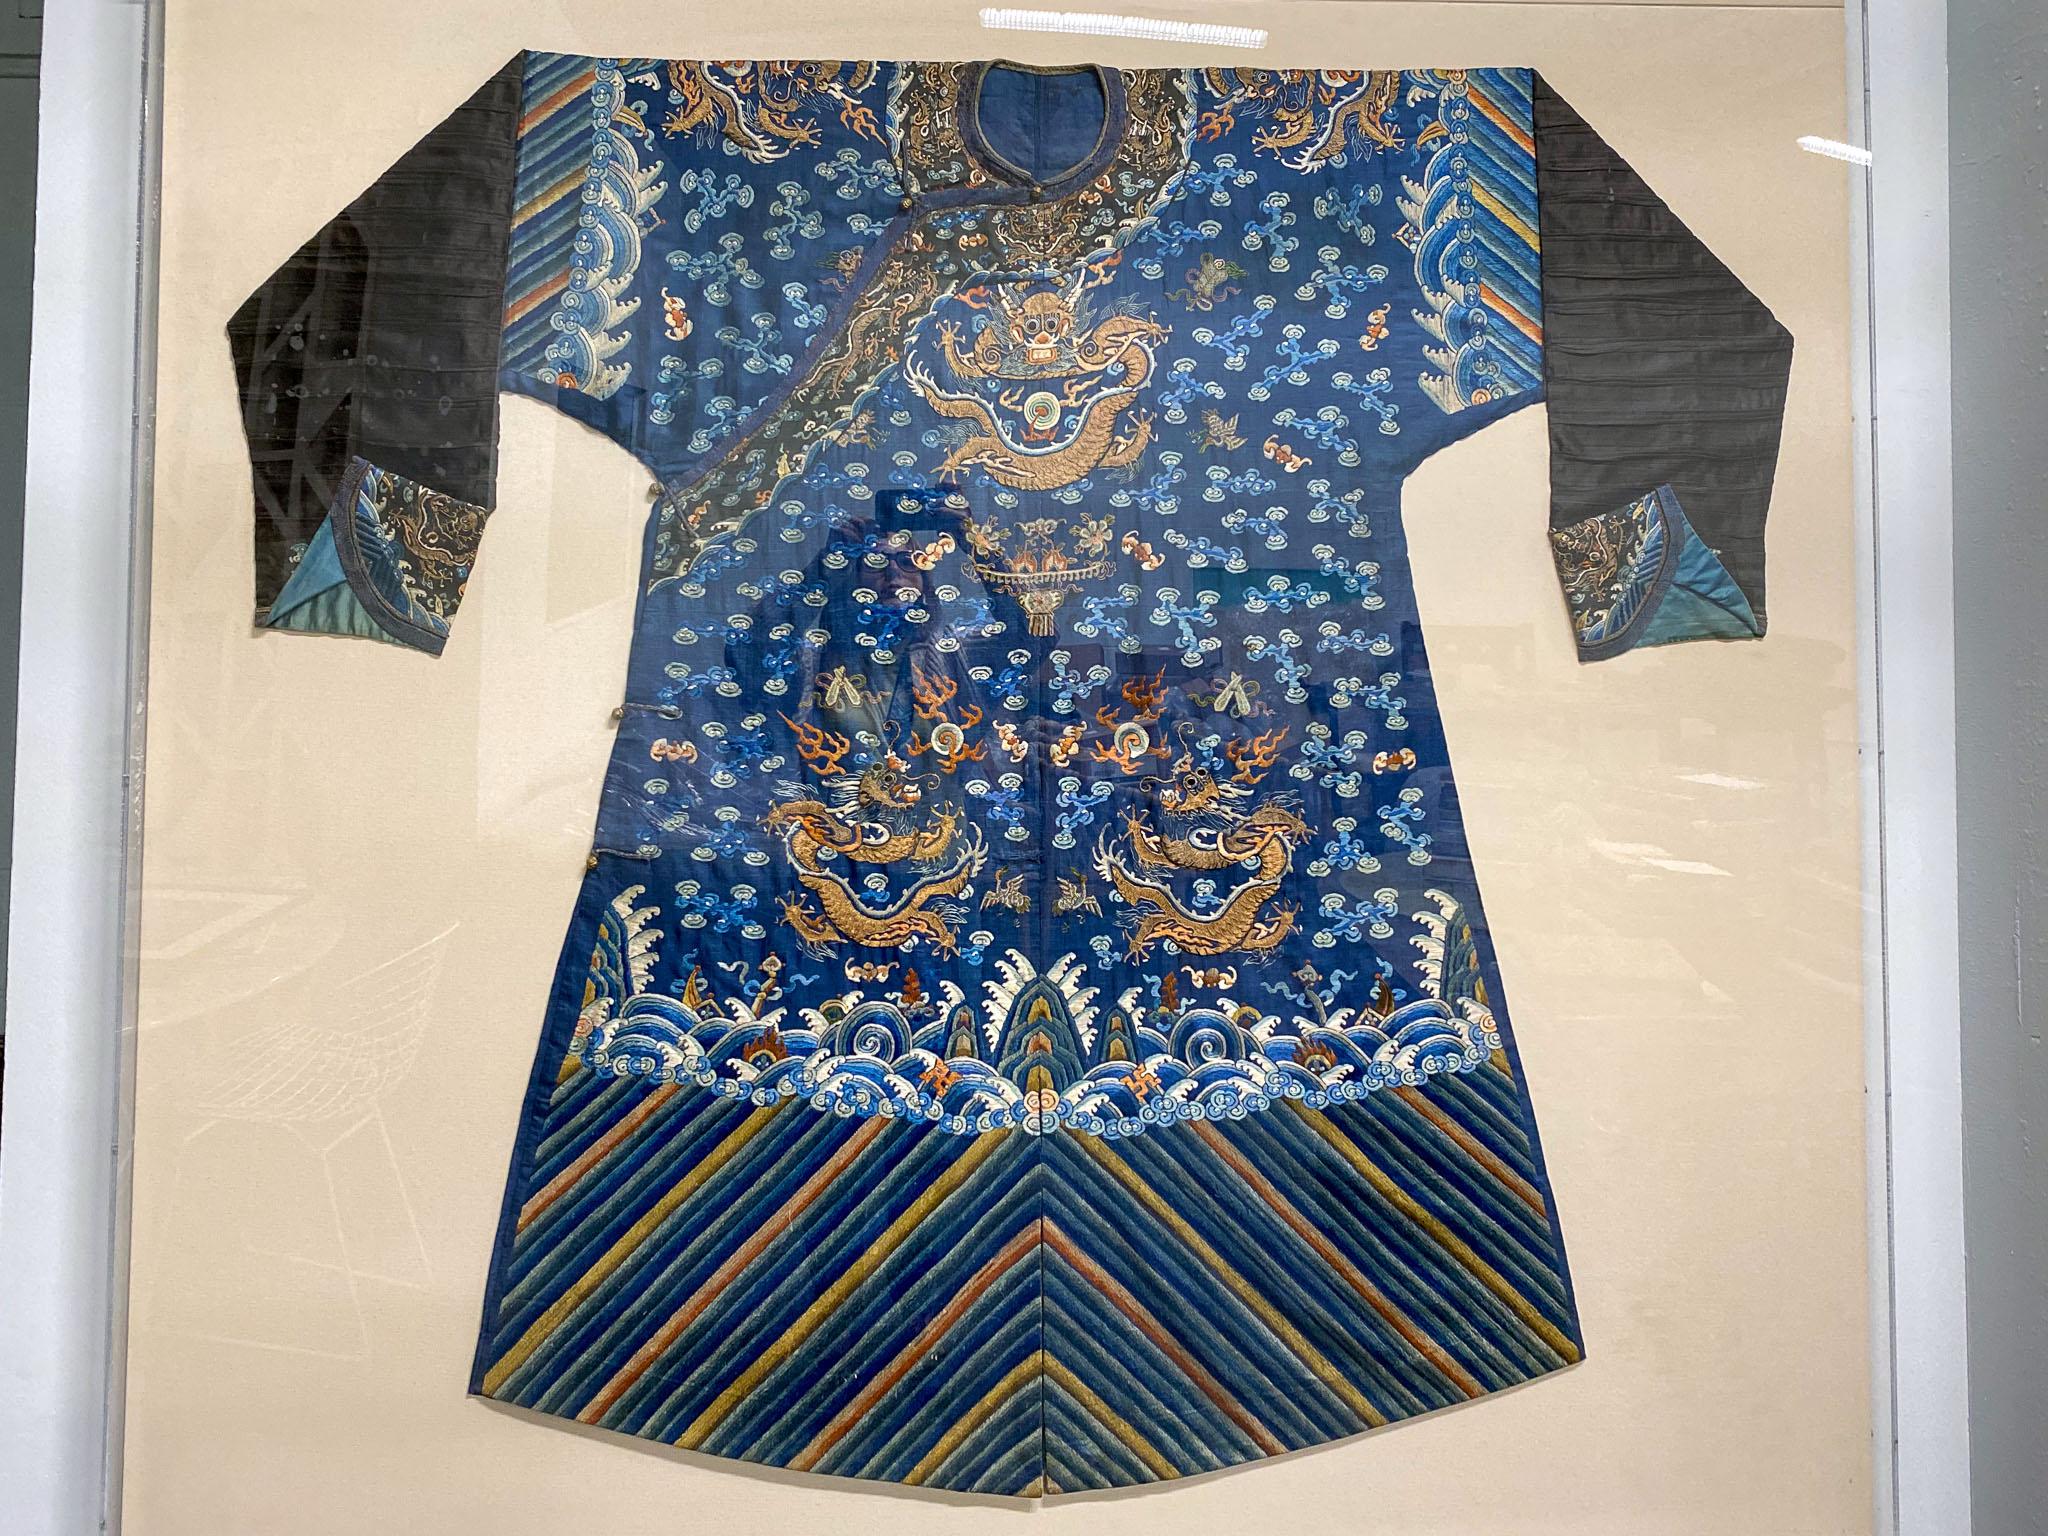 Beautifully crafted and sewn Chinese robe. Complete with dragons and other symbolism, this blue robe has been framed out in an acrylic shadow box. 
Purchased from a collection with other fine Chinese antiquities and robes, this piece has been